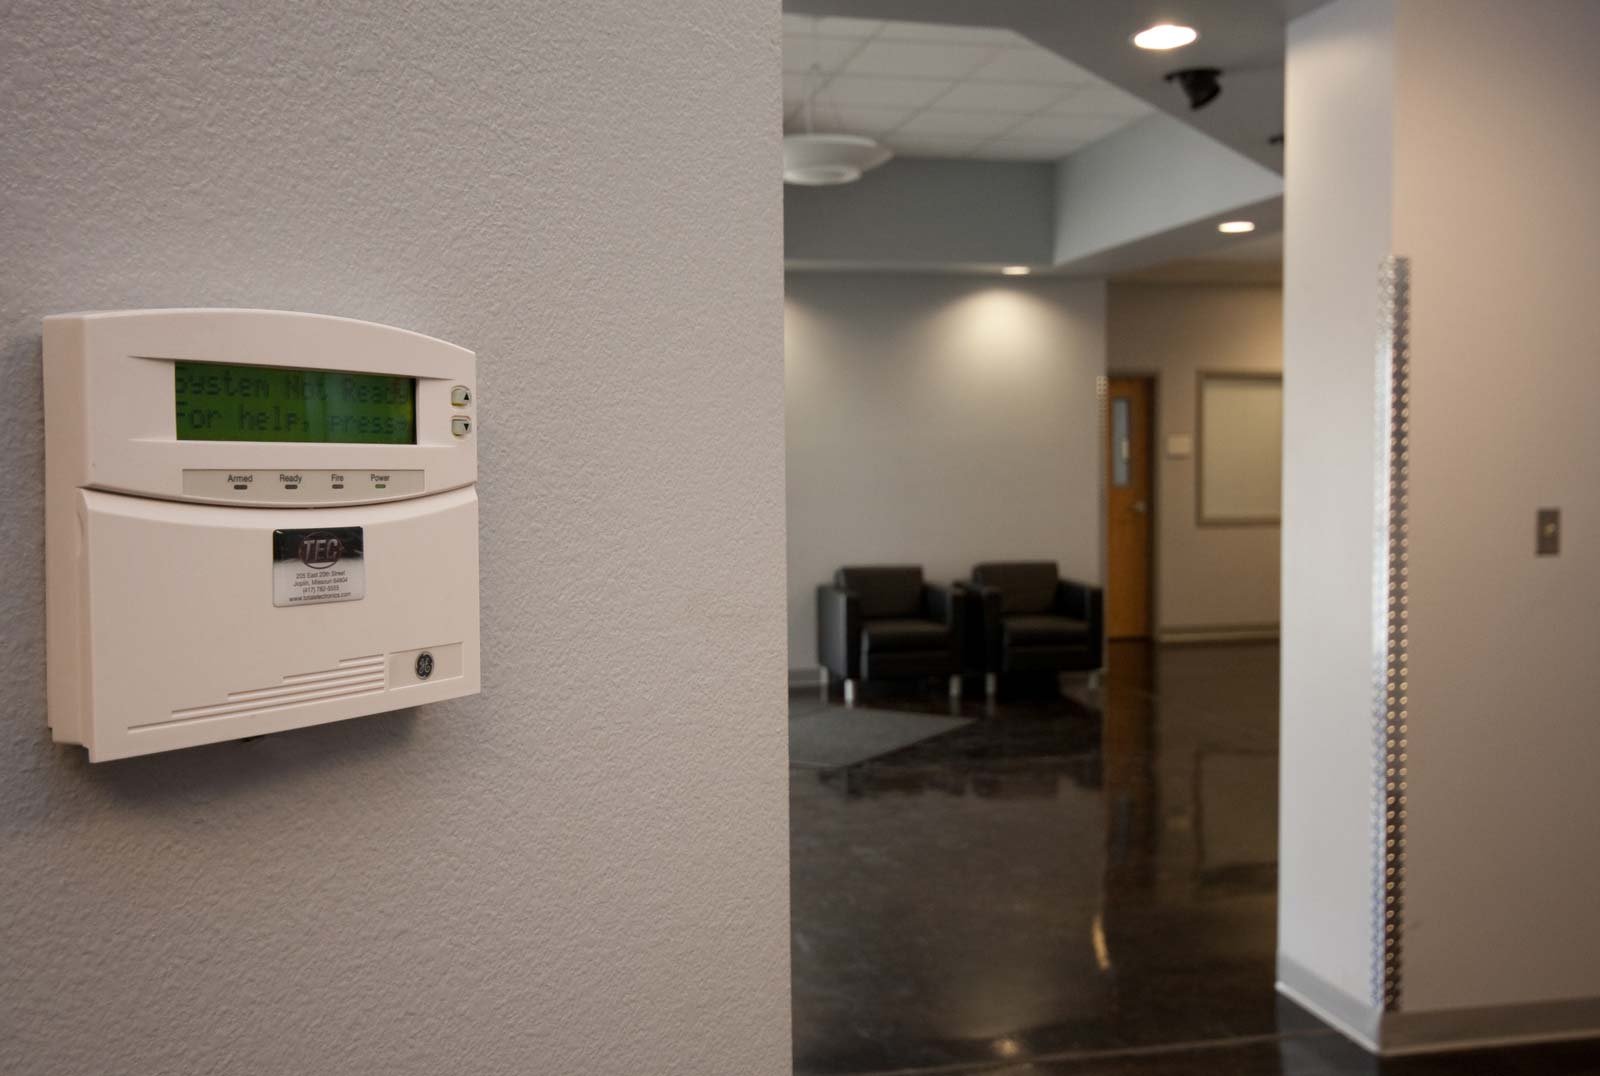 How Are Most Residential And Commercial Alarm Systems Powered